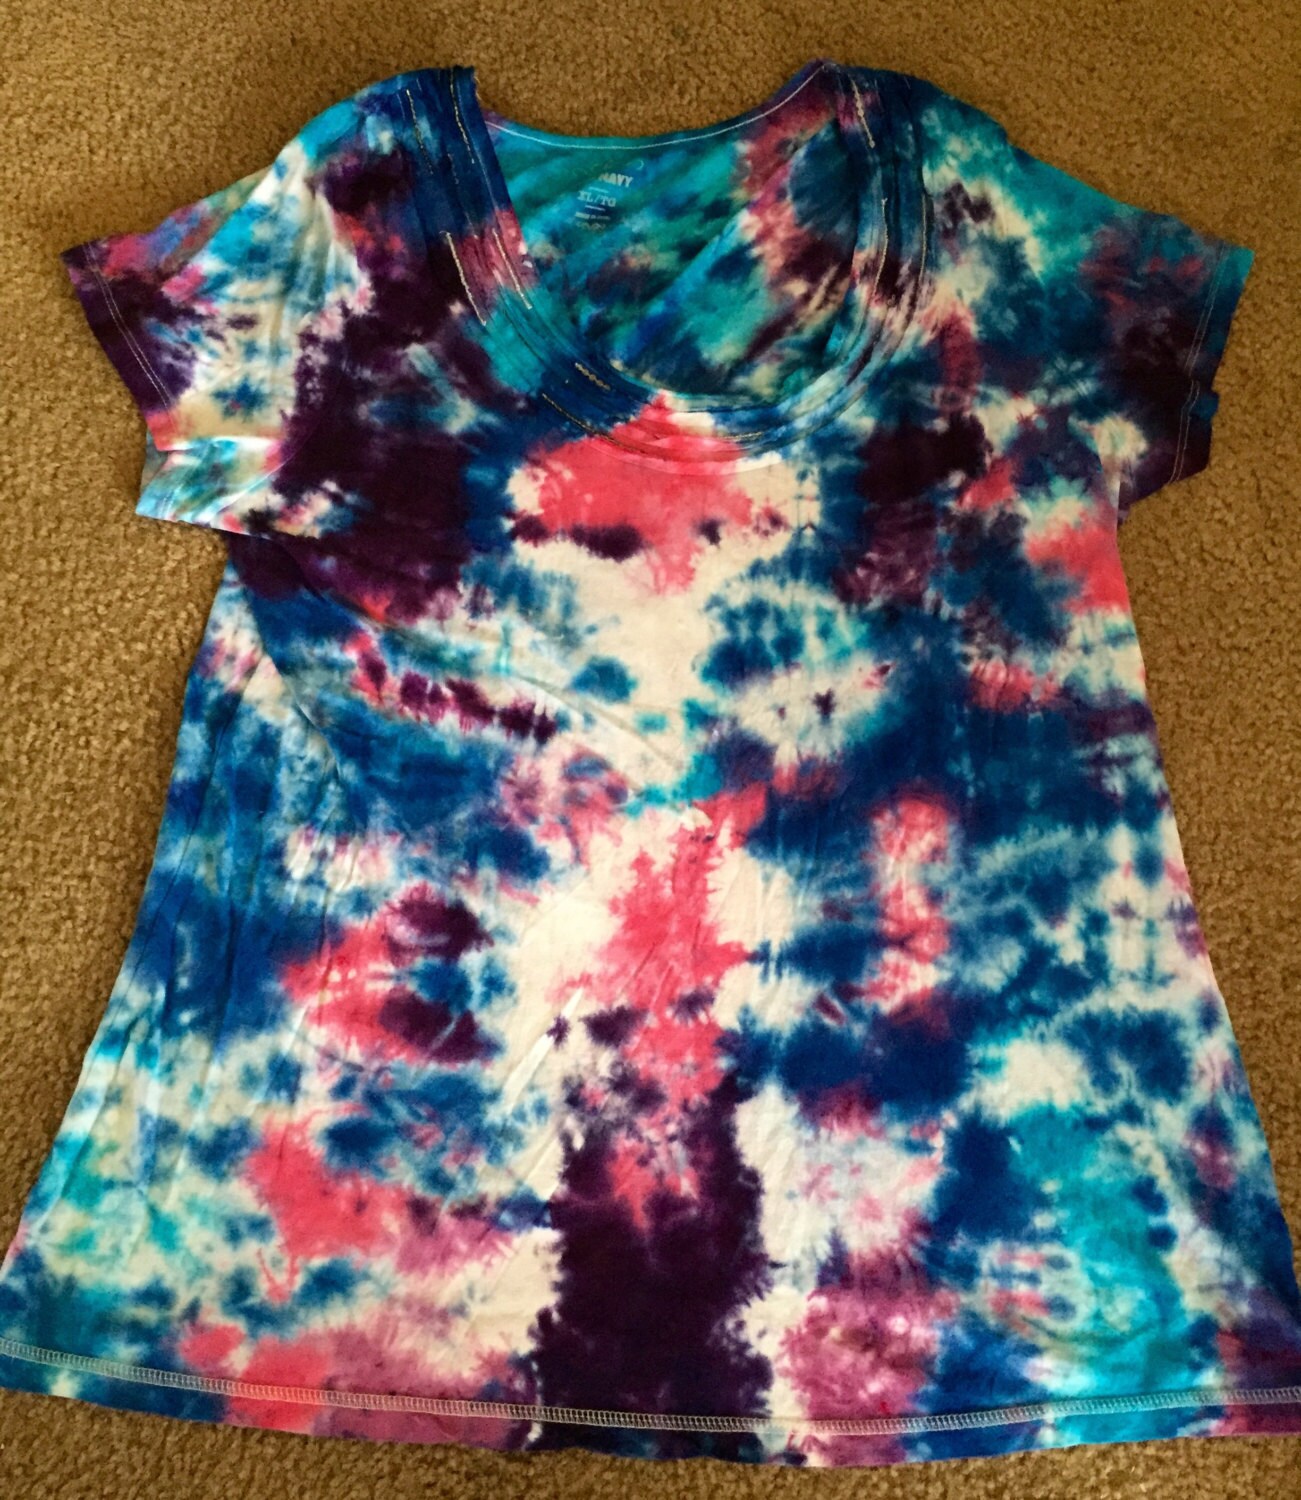 Bree All Scrunched Up Perky Tie Dye Tee with Decorated Scoop | Etsy